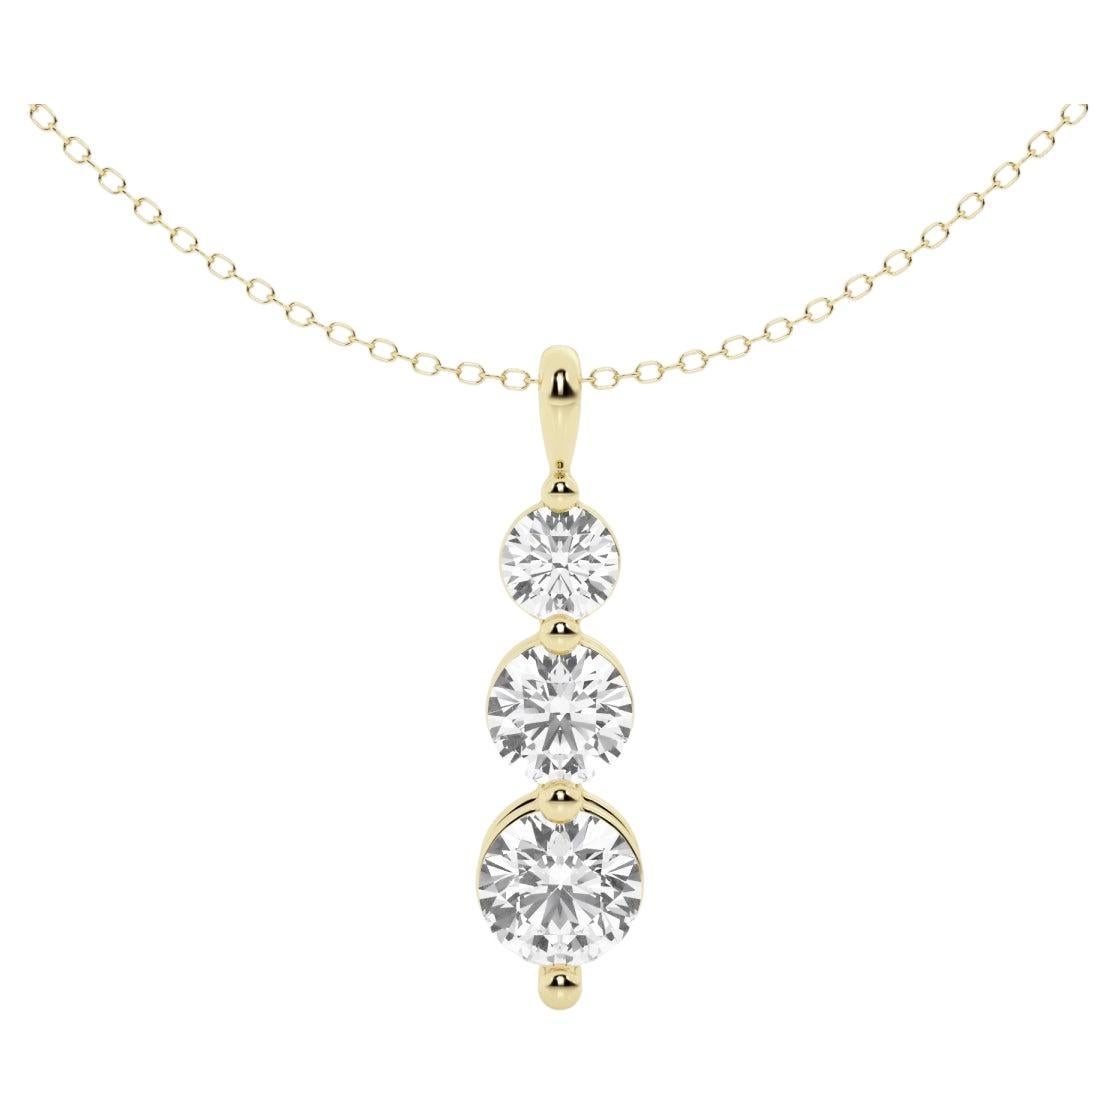 This impressive three-stone round diamond pendant is finely crafted in brightly polished 14 karat yellow gold and features three stones totaling a carat weight of 2.00CTW. These diamonds are SI clarity. Ideal as an anniversary or birthday present,